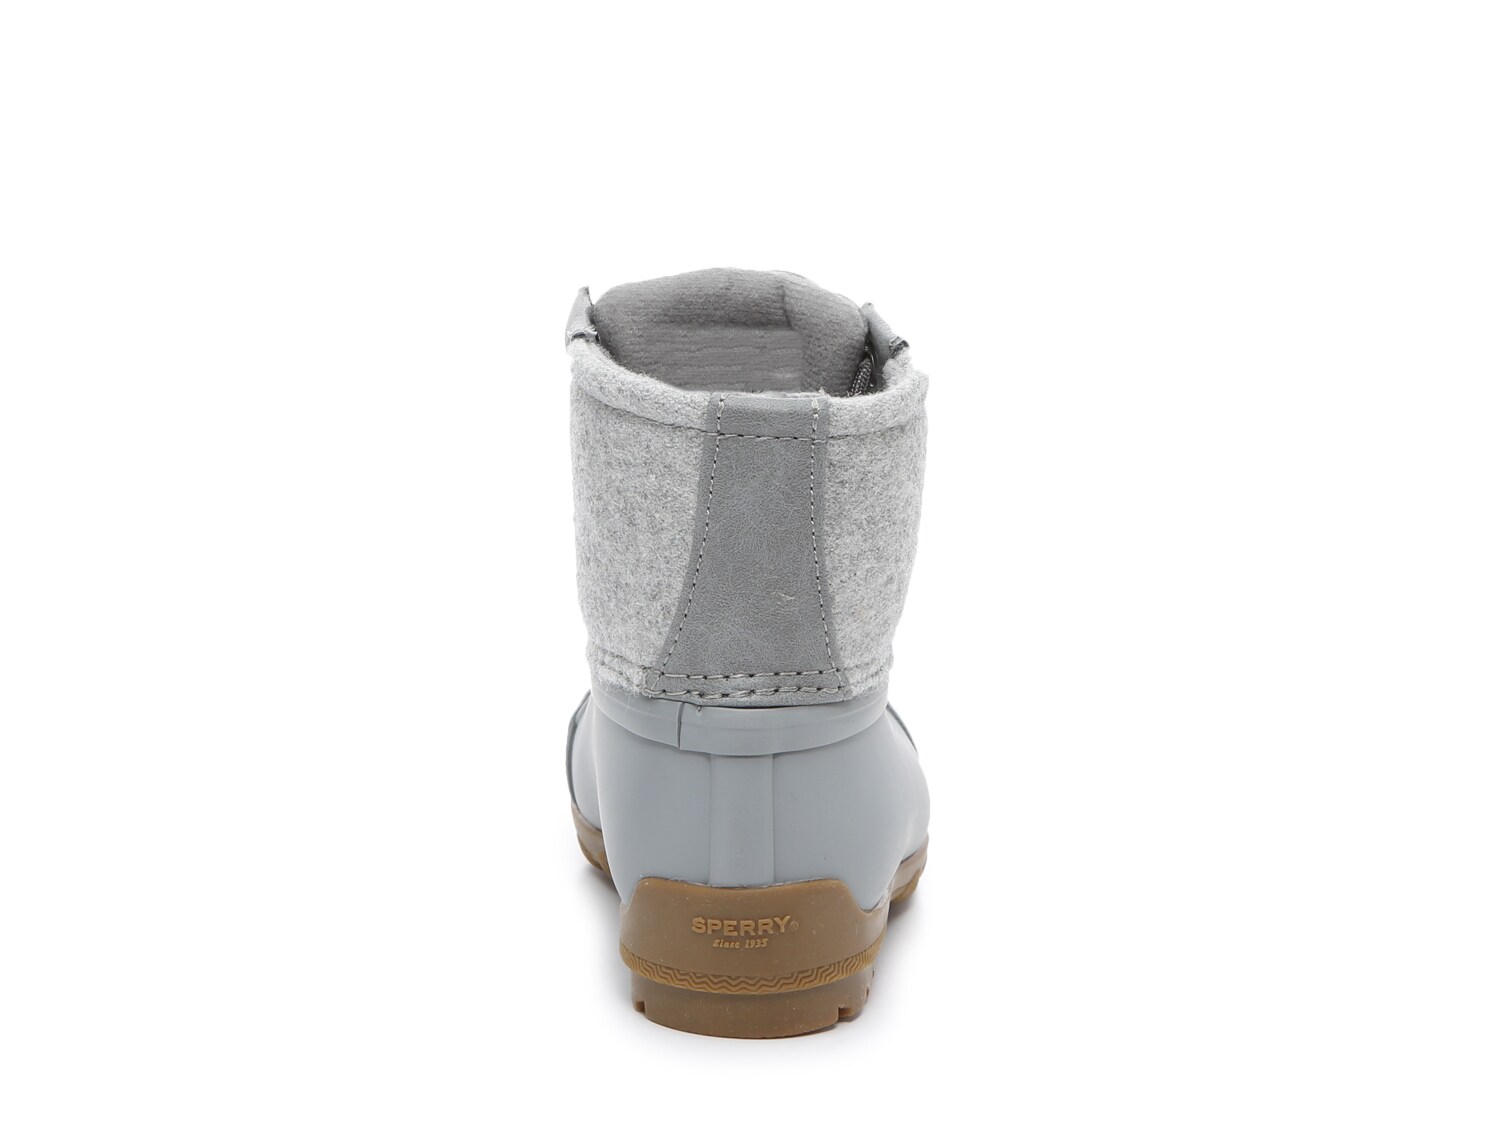 dsw sperry snow boots